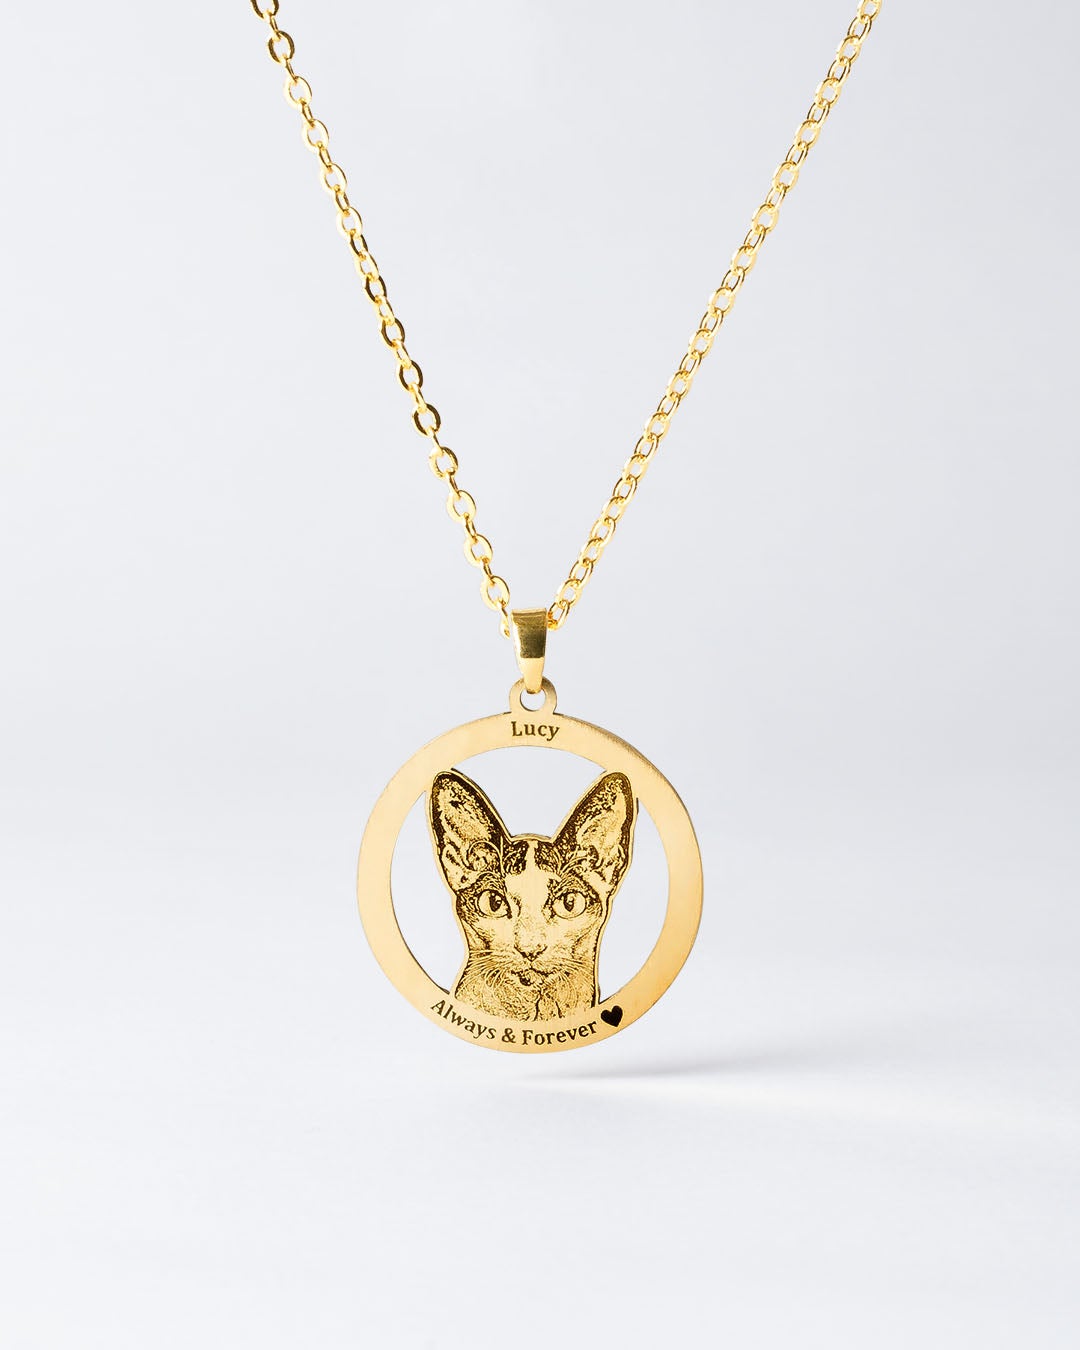 The Difference | Cat Pendant and Necklace Jewelry, Isle Of Man Cat Coin  Hand Cut, 14Karat Gold and Rhodium Plated, 7/8 ” in Diameter, ( #R 726 )